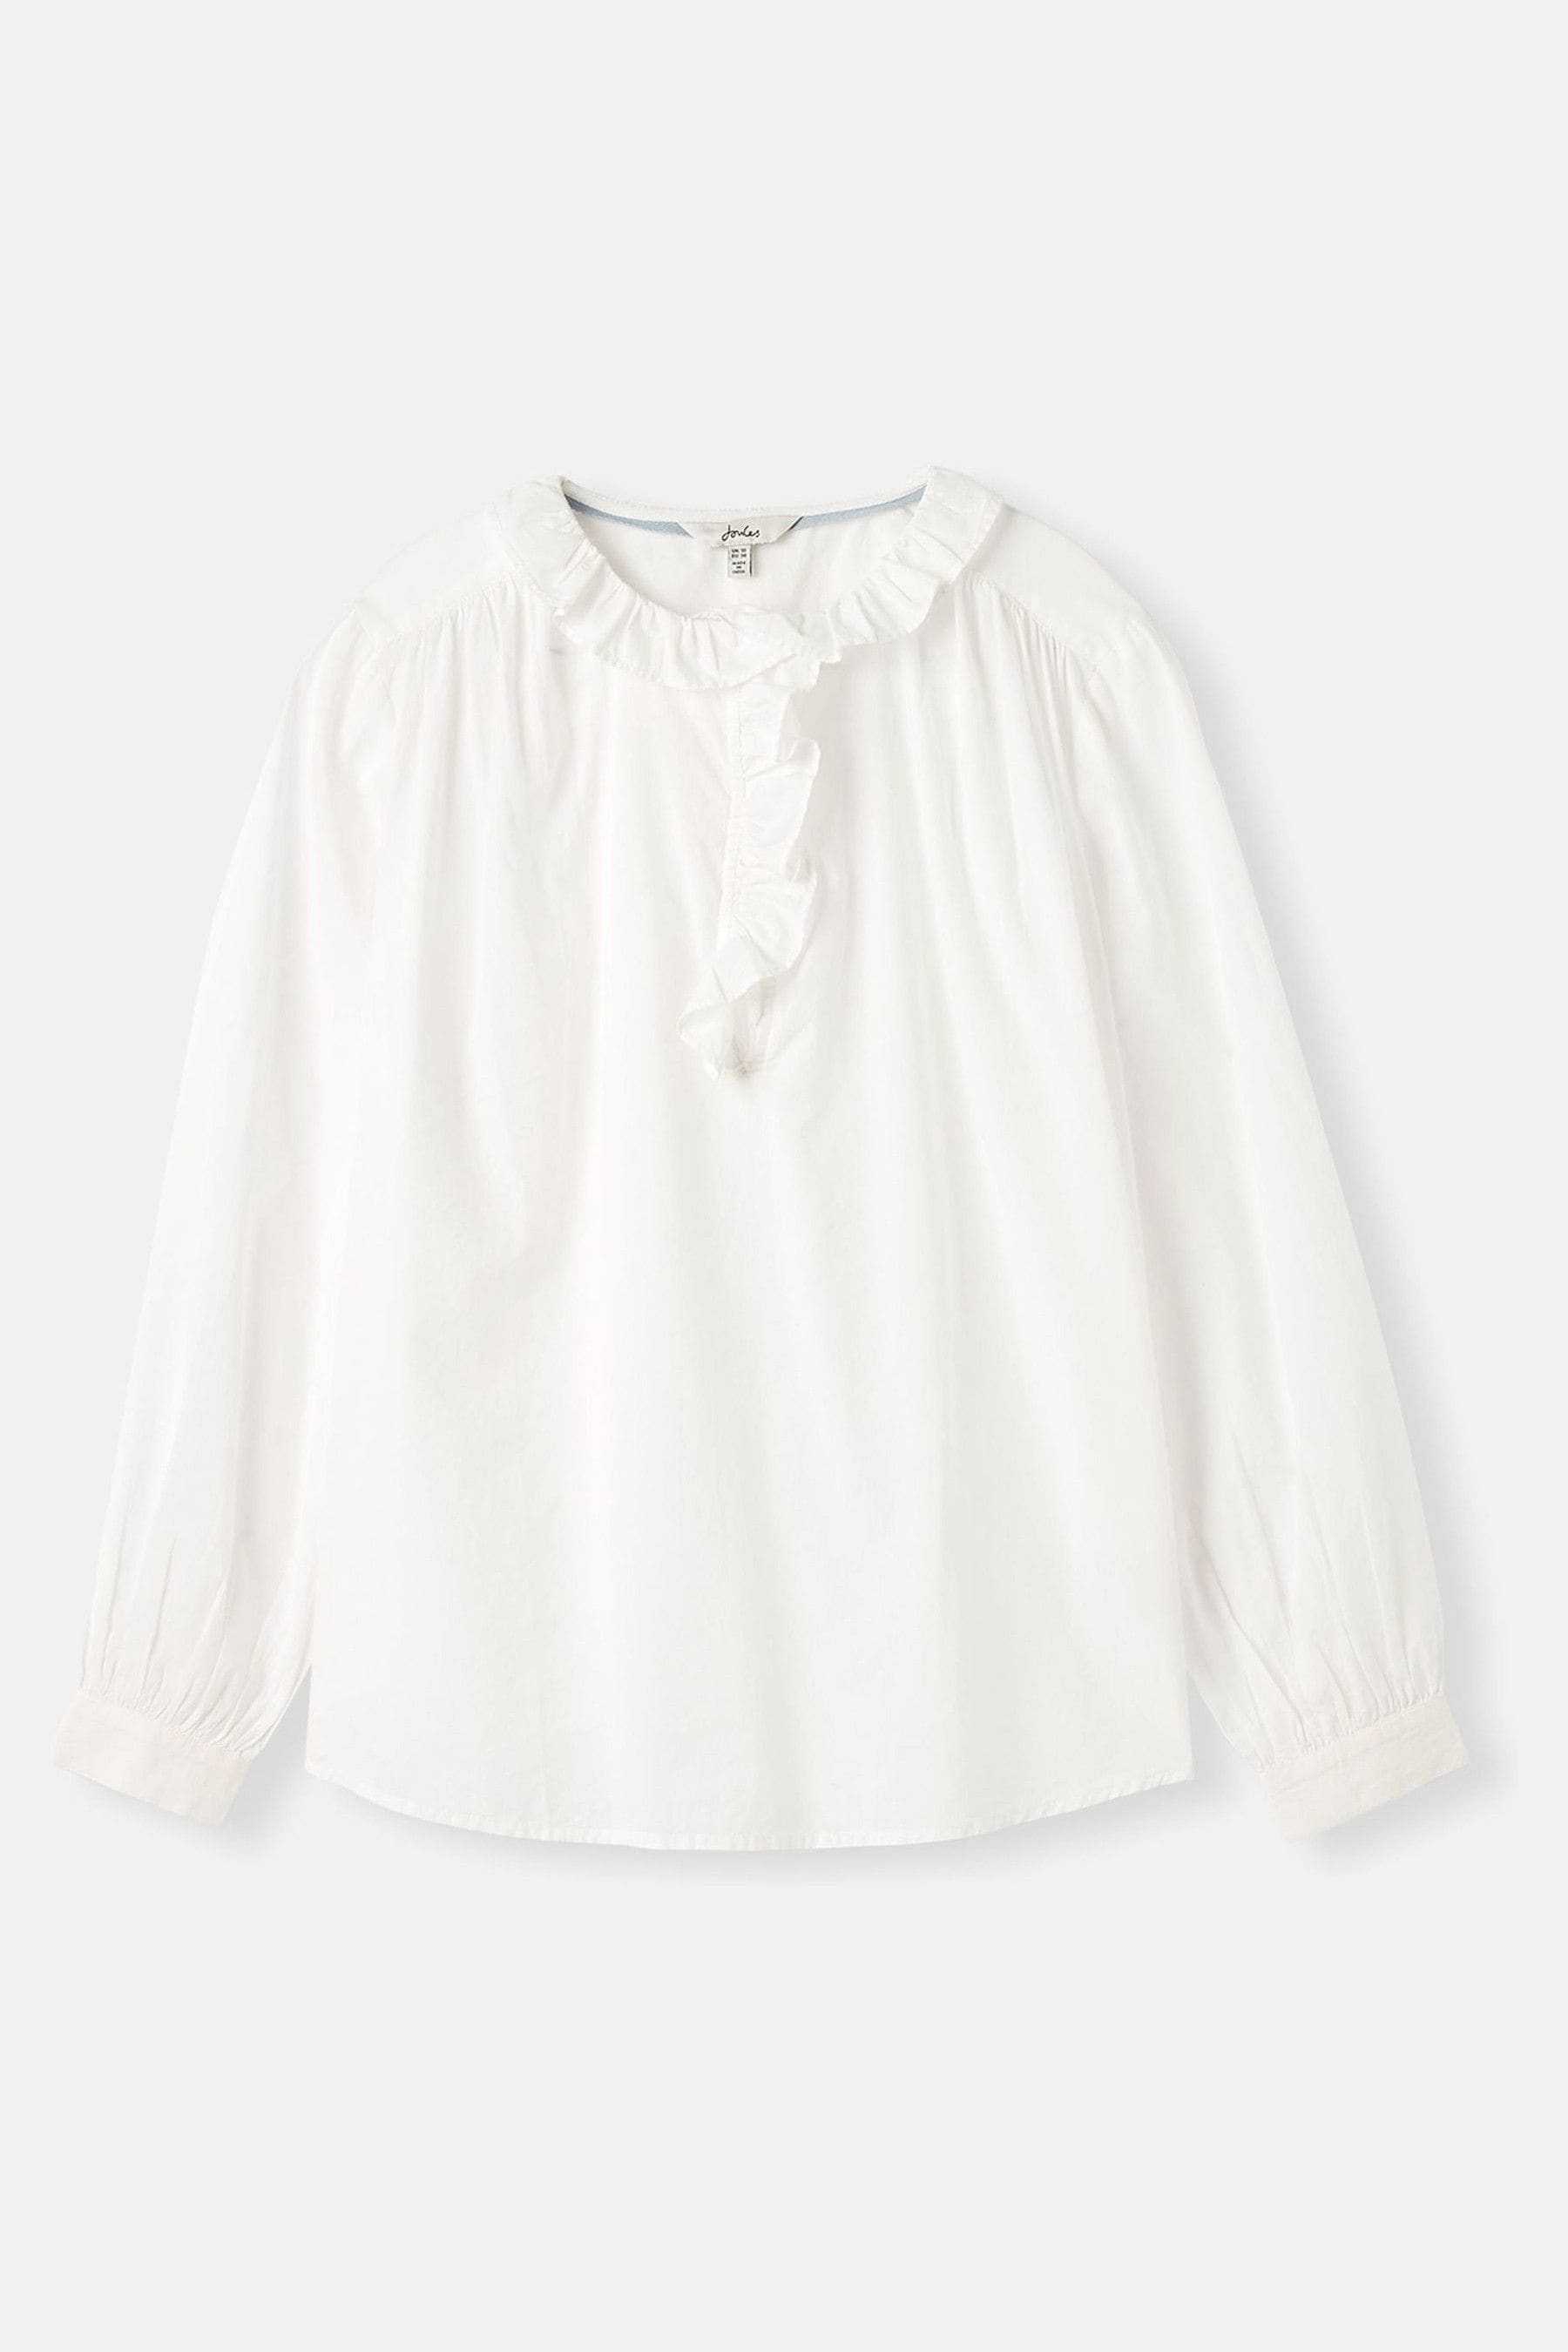 Buy Joules Melanie White Frill Blouse from the Next UK online shop